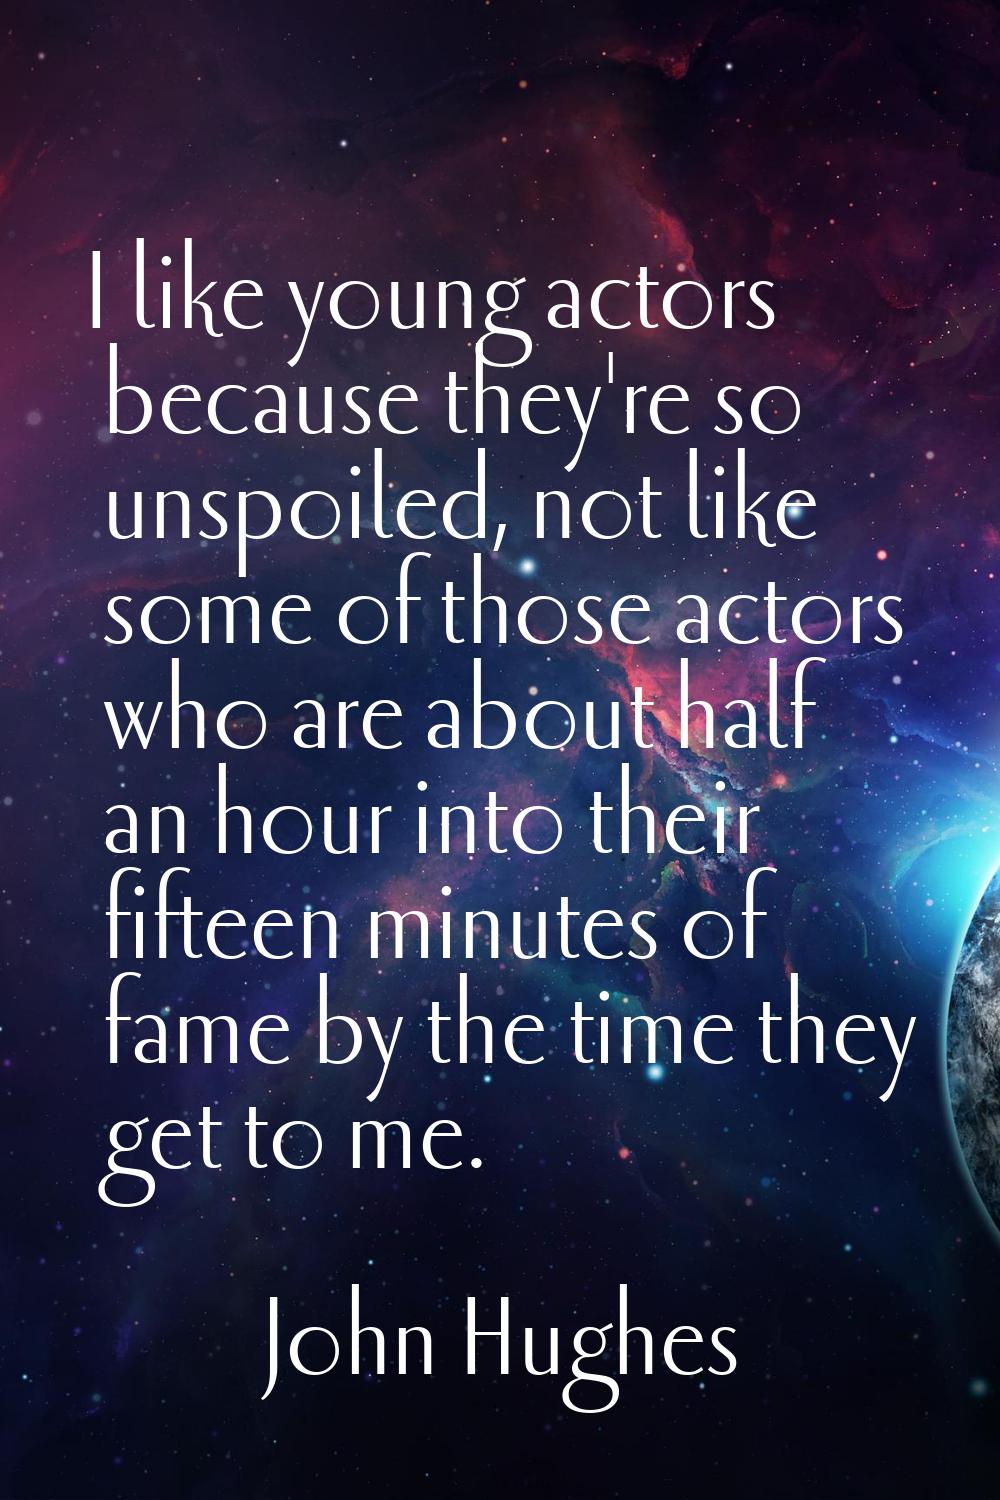 I like young actors because they're so unspoiled, not like some of those actors who are about half 